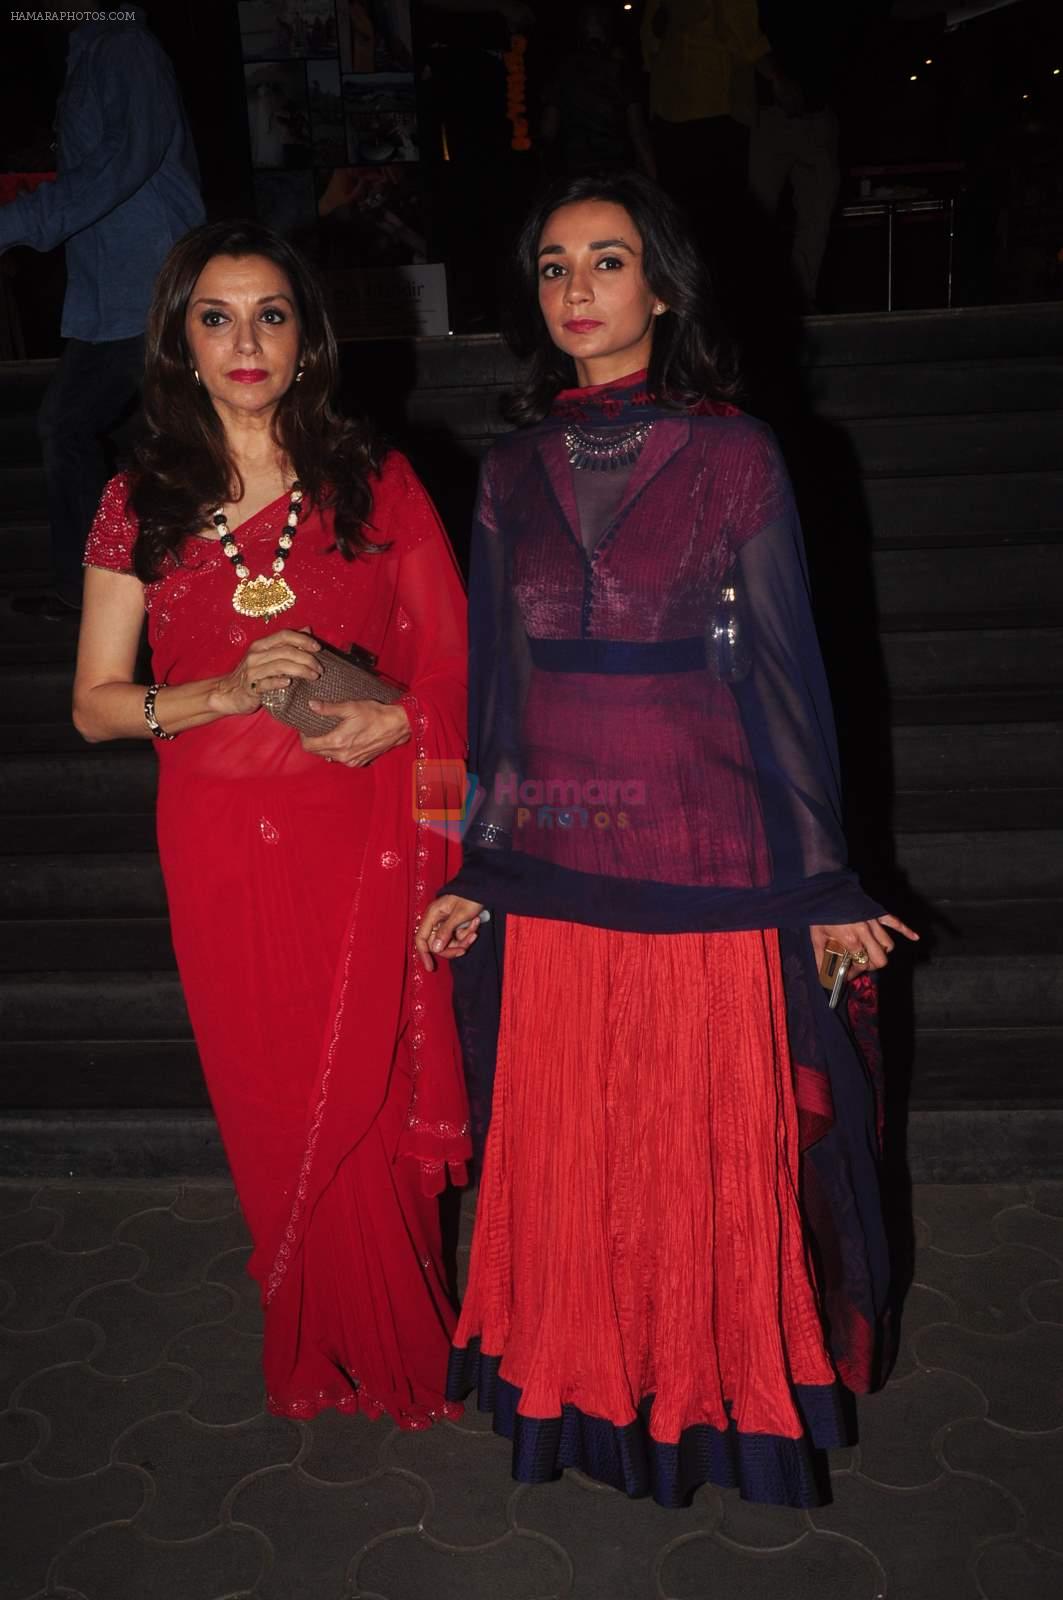 Lillete Dubey, Ira Dubey at Second Marigold premiere in Cinemax, Mumbai on 13th March 2015